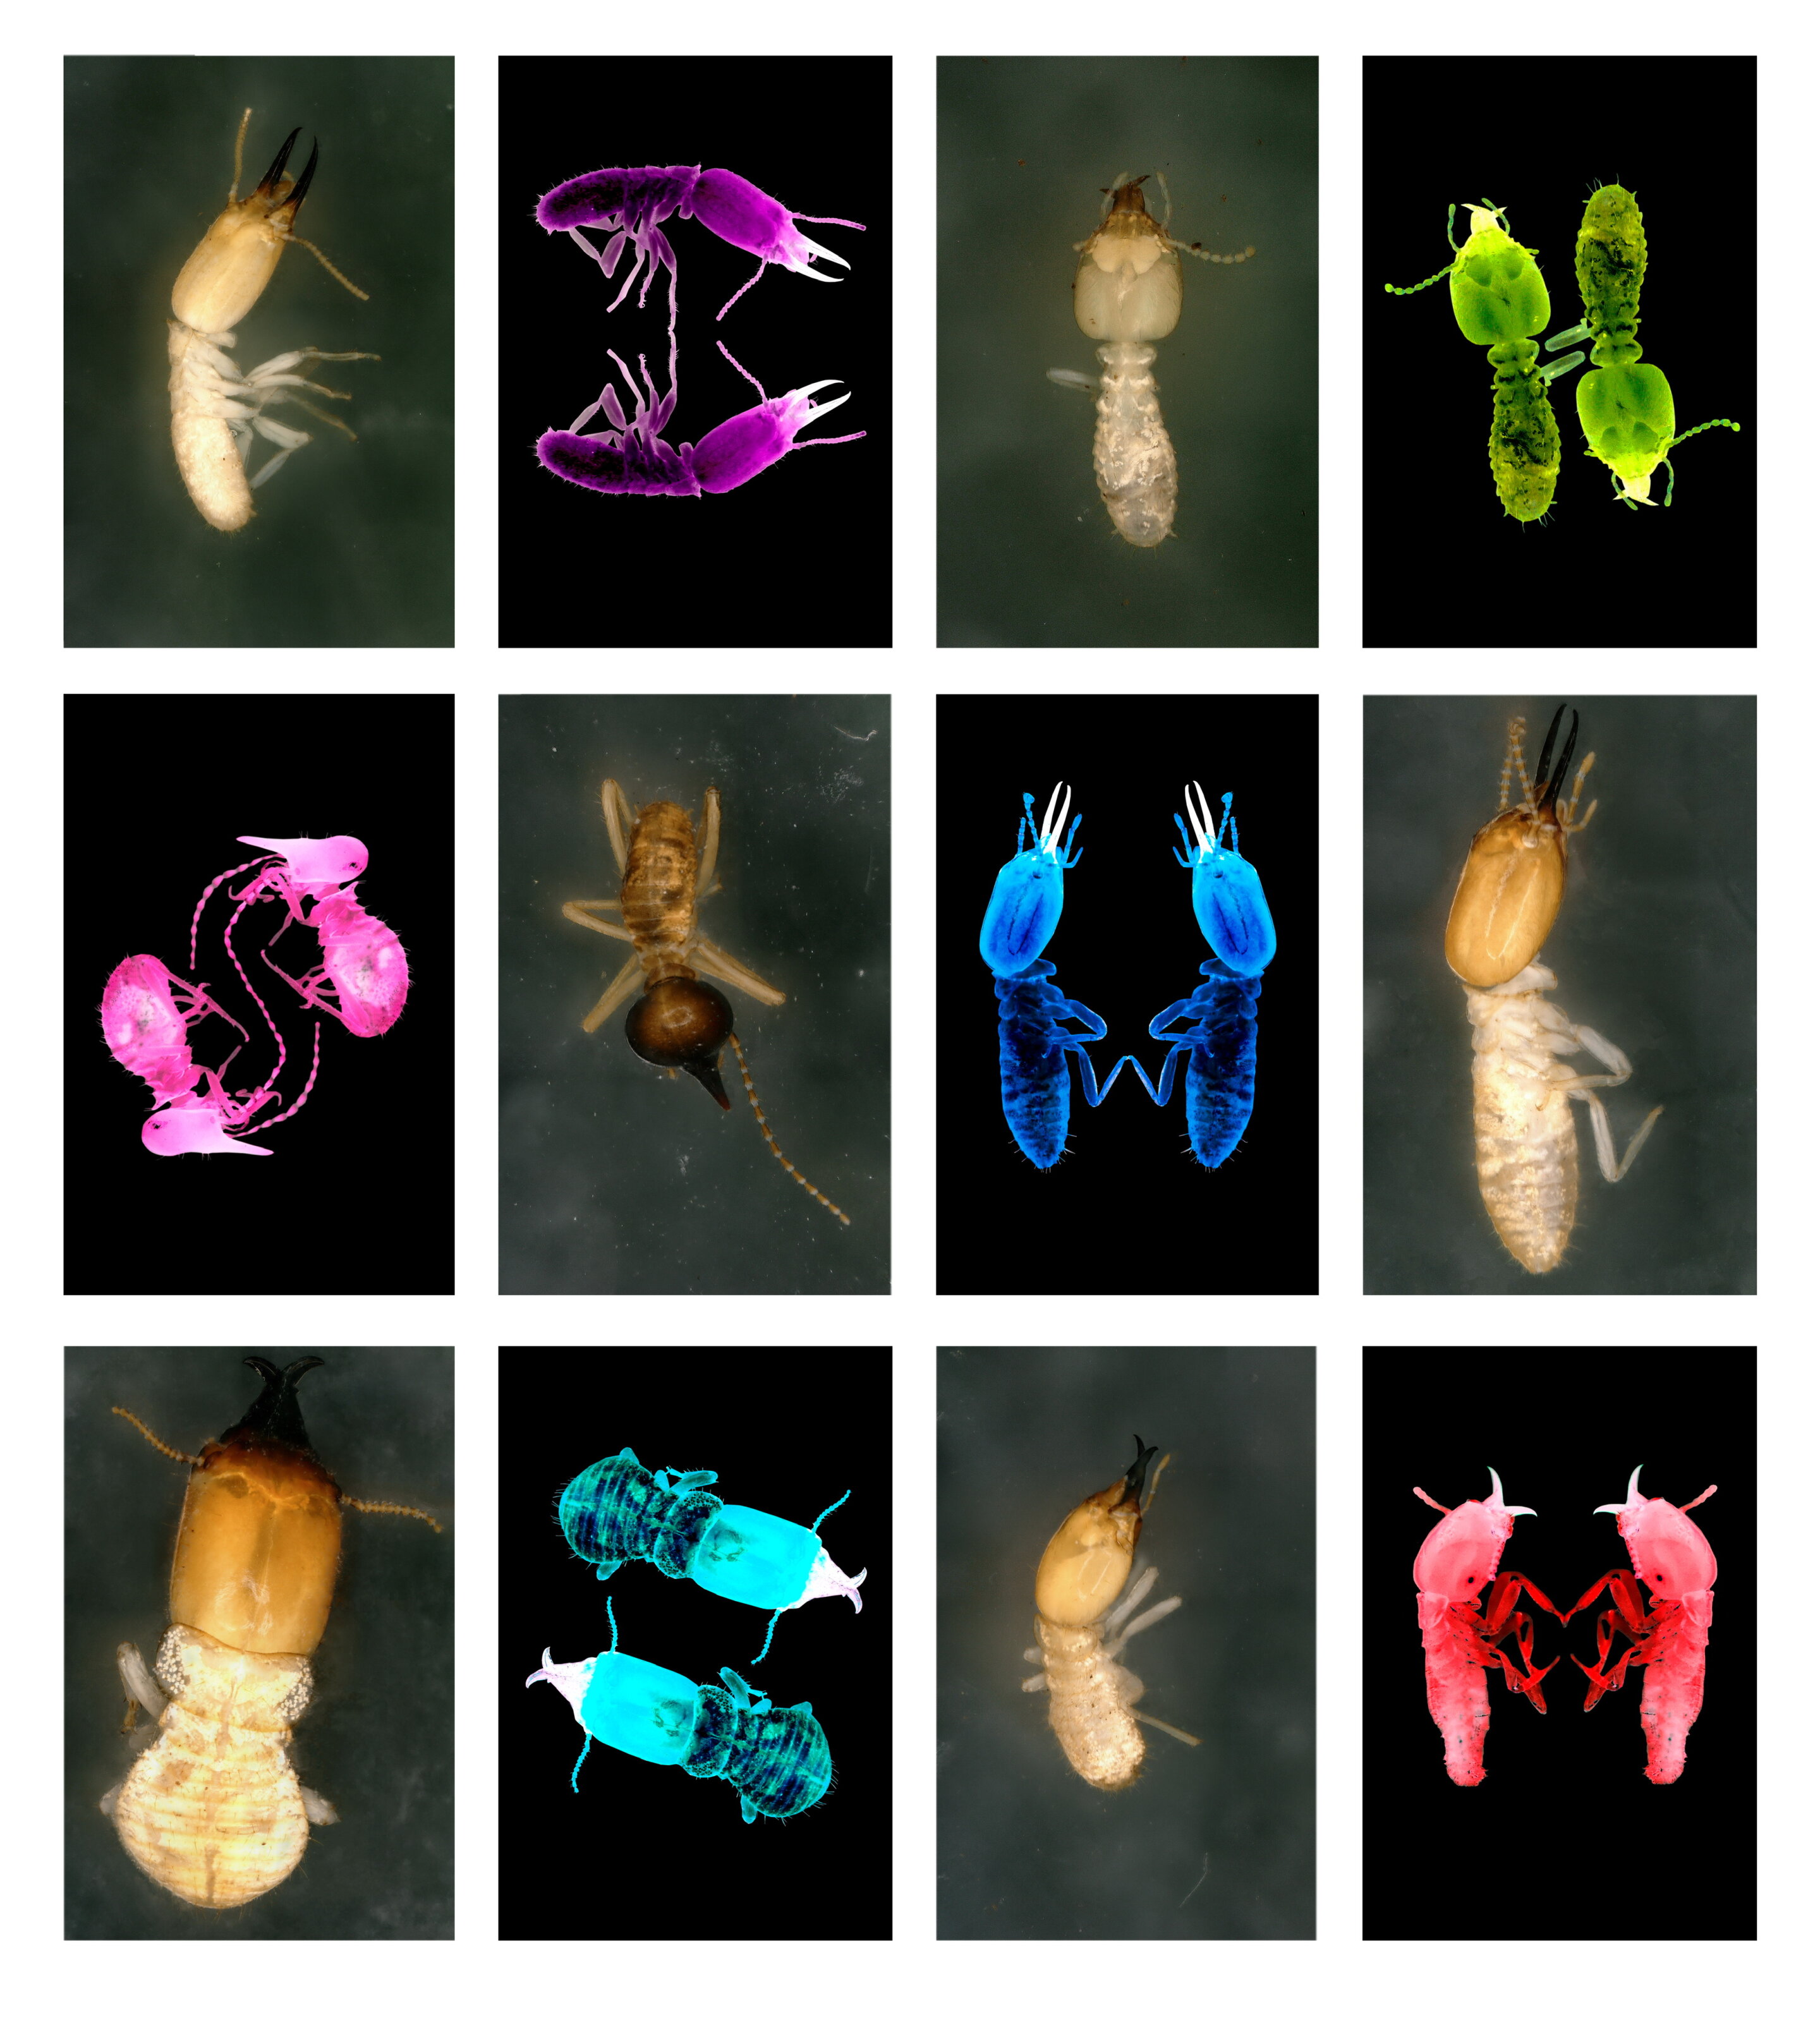 photo of Termites may have a larger role in future ecosystems image